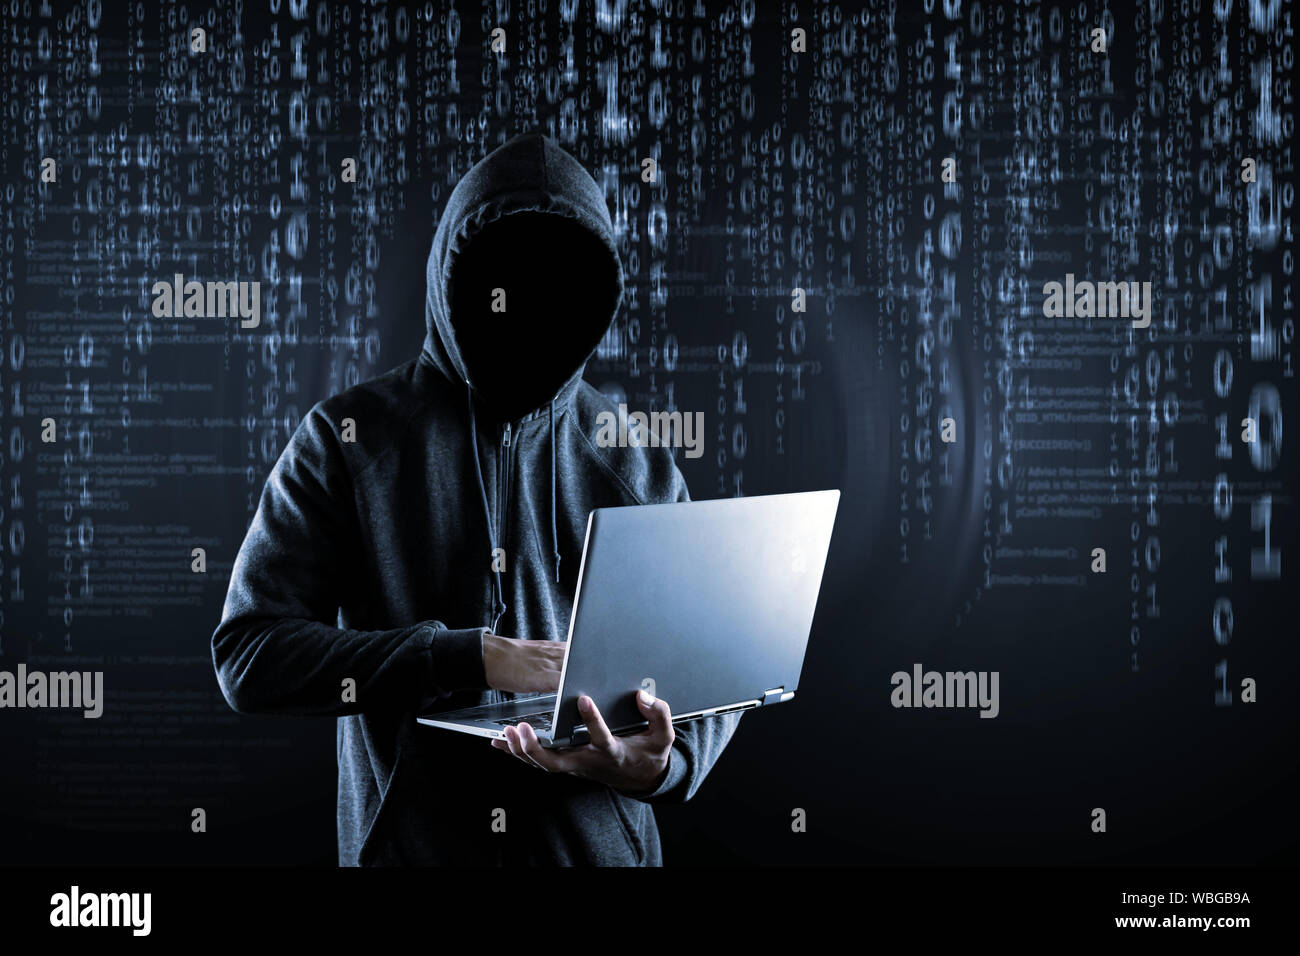 Hacker with laptop stock image Image of access concept  123145795